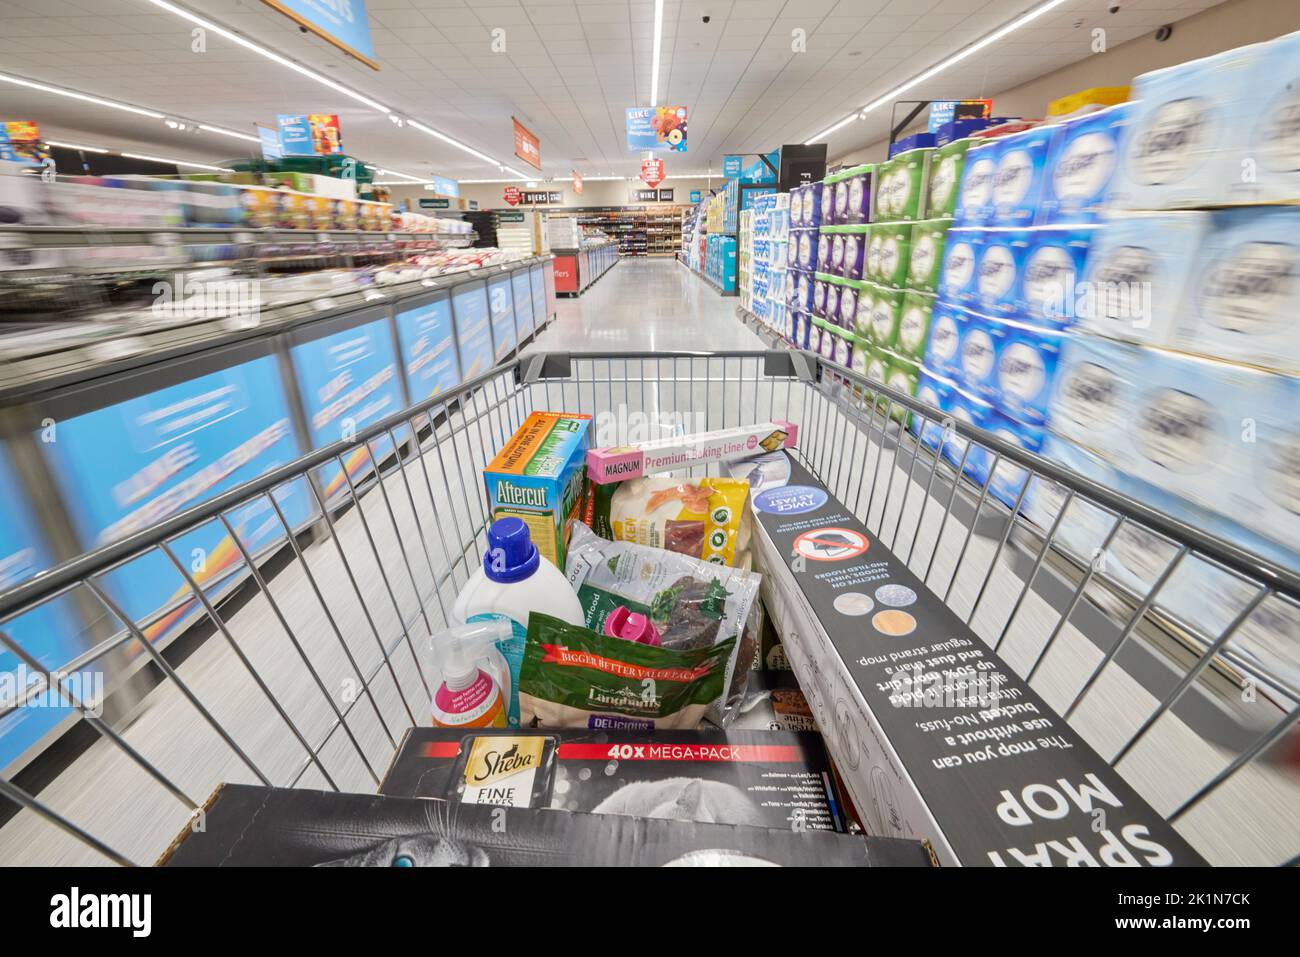 ALDI Supermarket  interior with trolly moving through the aisles Stock Photo